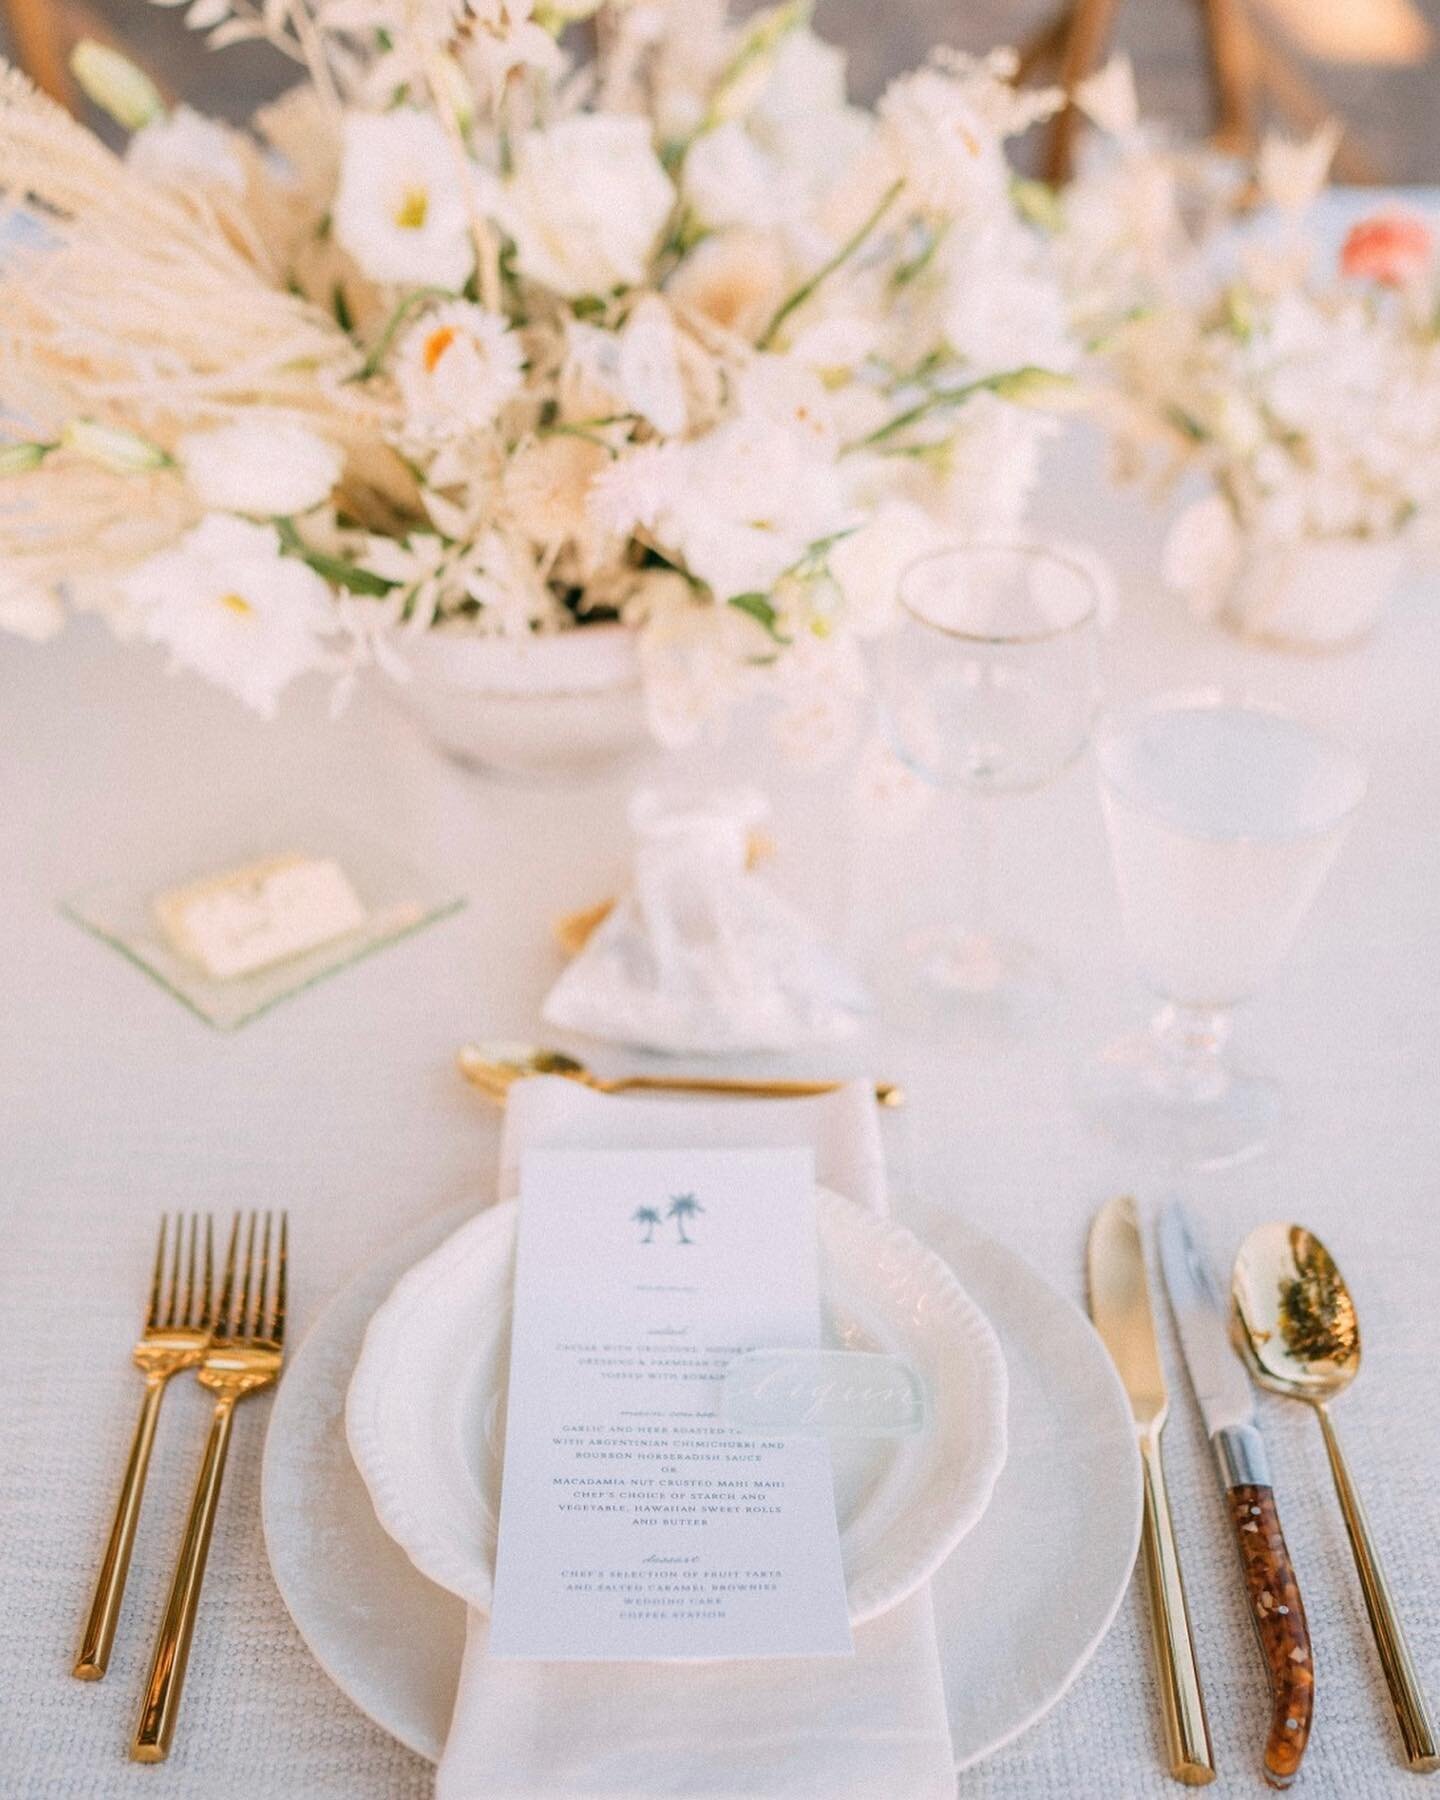 Celebrating this beautiful feature on @weddingchicks today!! ✨ Classic elegance featuring our vintage dinnerware collection at the #olowaluplantationhouse 
.

PC: @leesonlphotography 
Planning + Design: @aegirweddings 
Place Settings: @setmaui 
Flora